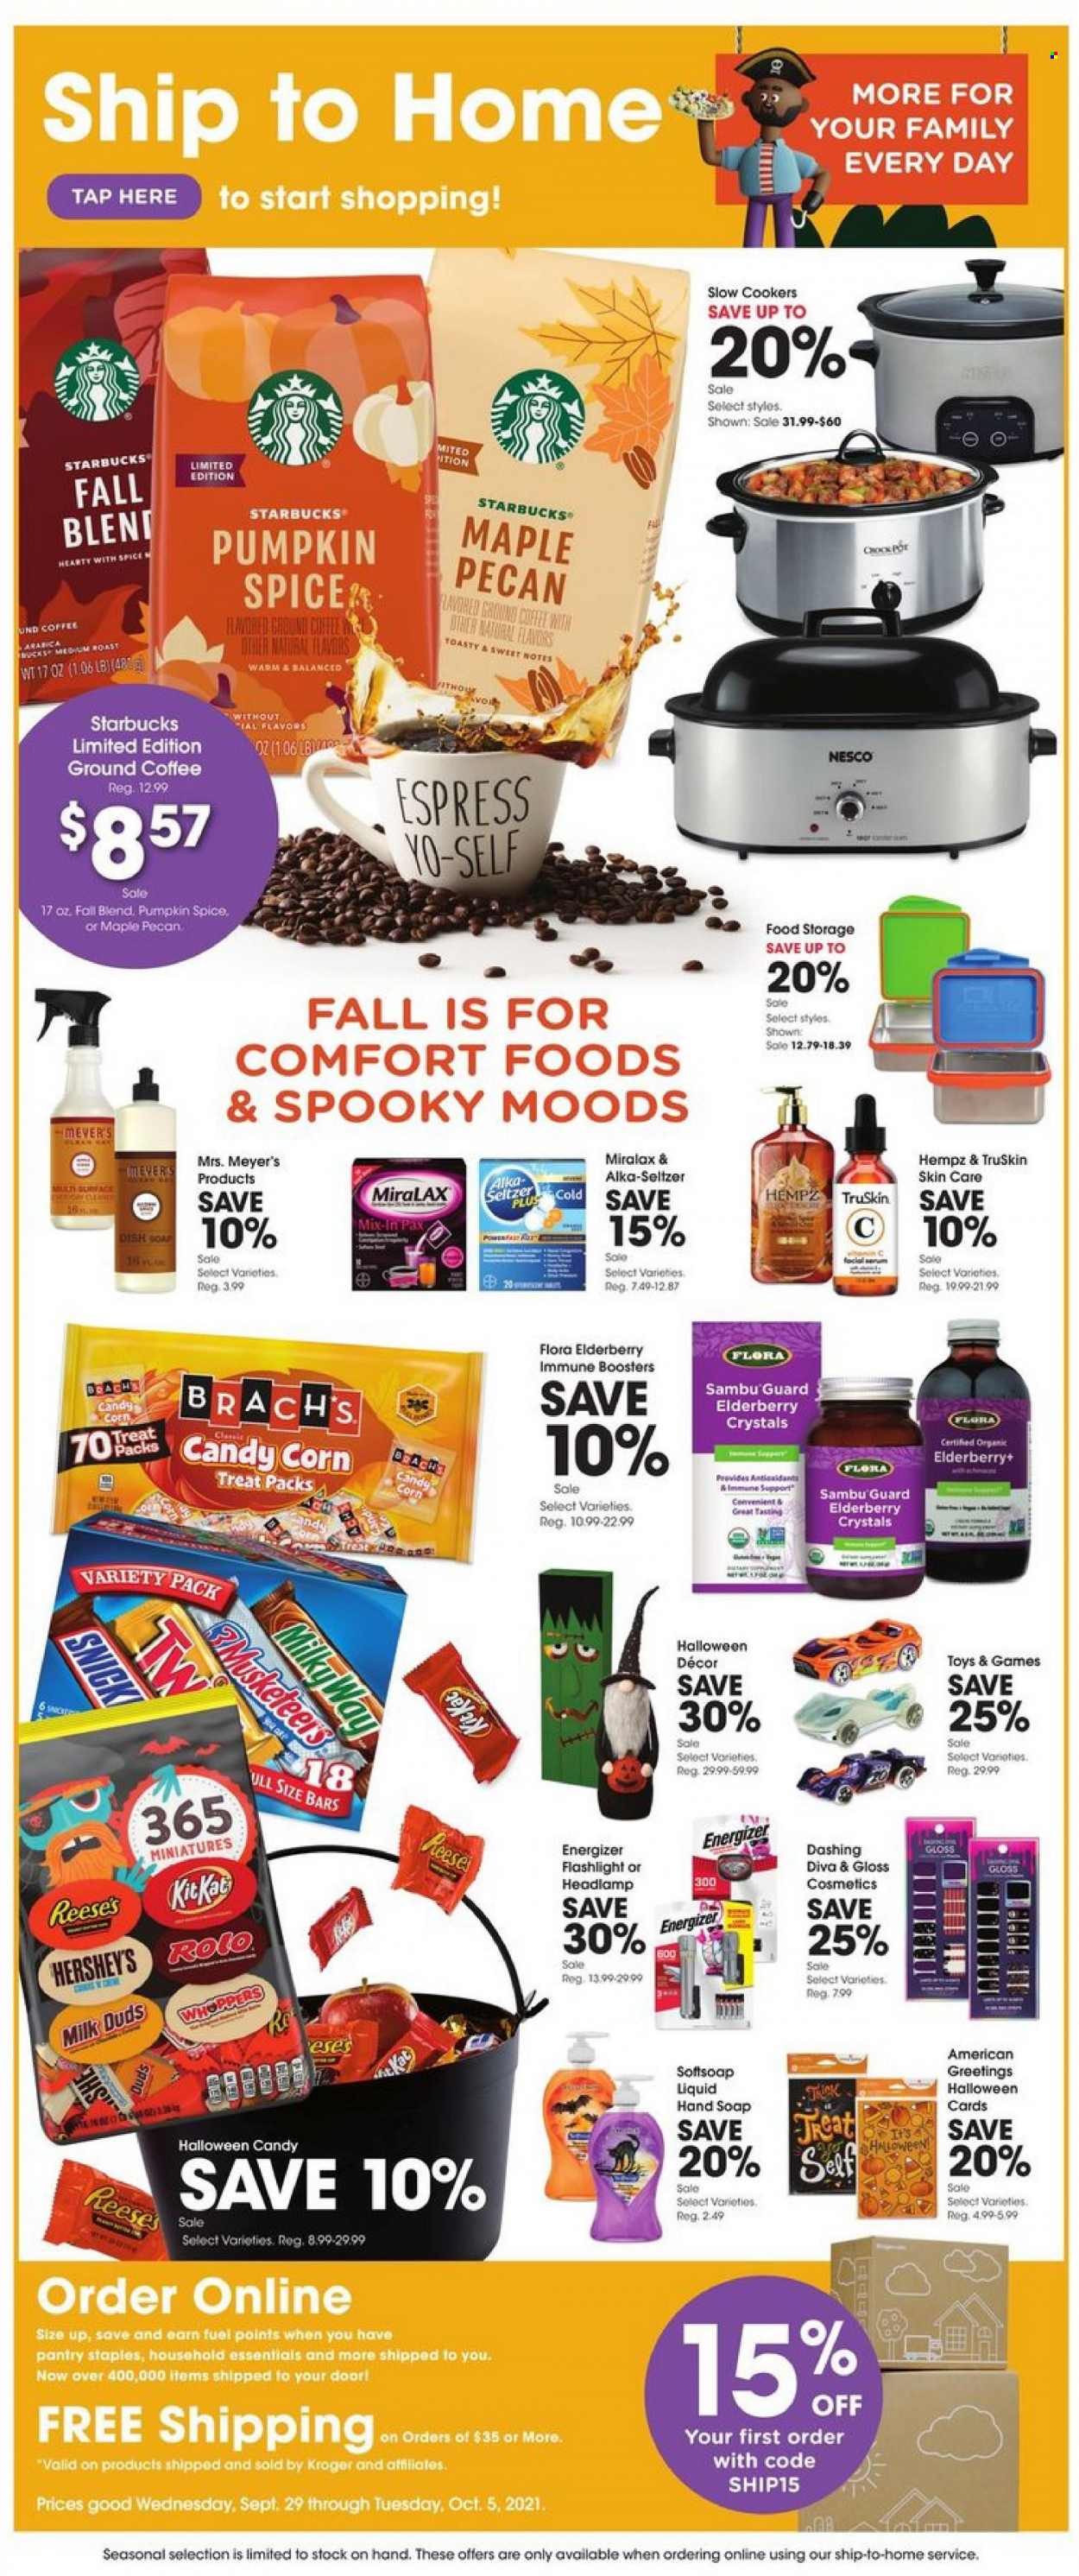 thumbnail - Baker's Flyer - 09/29/2021 - 10/05/2021 - Sales products - corn, Flora, Reese's, Hershey's, Milk Duds, Milky Way, spice, coffee, Starbucks, ground coffee, Softsoap, hand soap, soap, serum, Energizer, headlamp, MiraLAX, Alka-seltzer. Page 1.